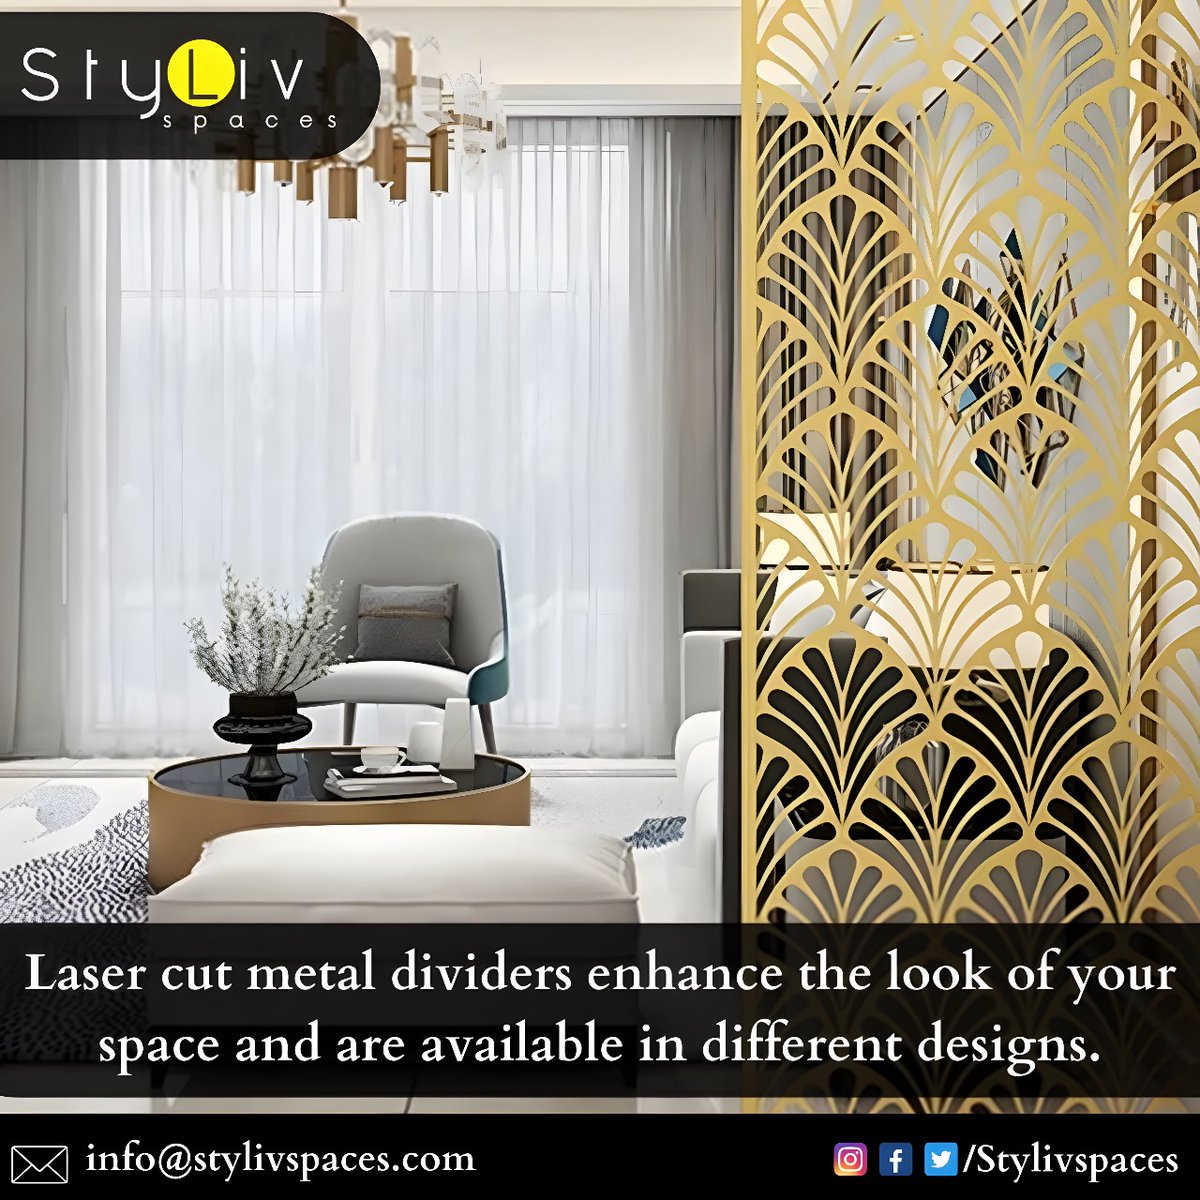 Laser cut metal dividers enhance the look of your space and are available in different designs.  stylivspaces.com   

#MetalDividers #LaserCutDesigns #SpaceEnhancement #DecorativeMetal #InteriorDesign #CustomDividers #UniqueSpaces #MetalArtistry #HomeDecor #DesignVariety